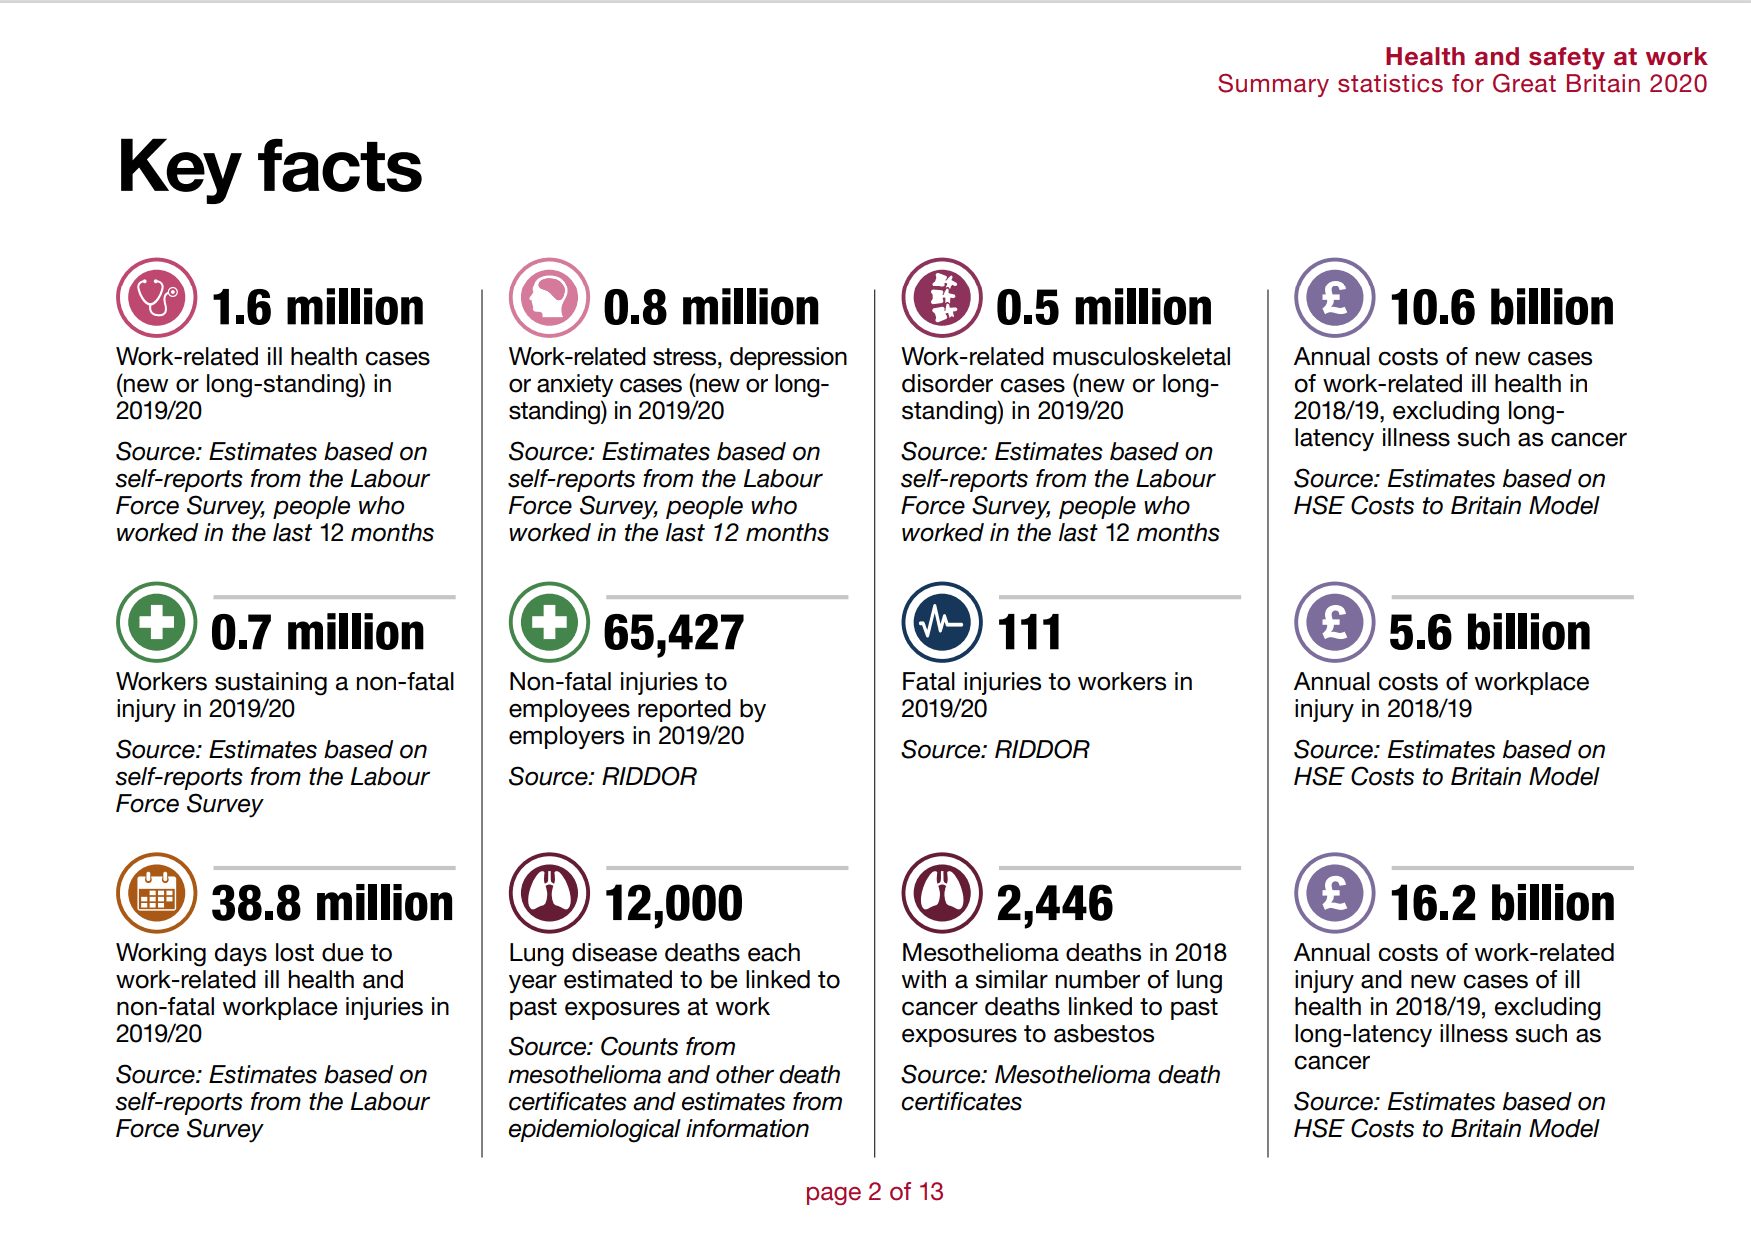 Key Facts Table